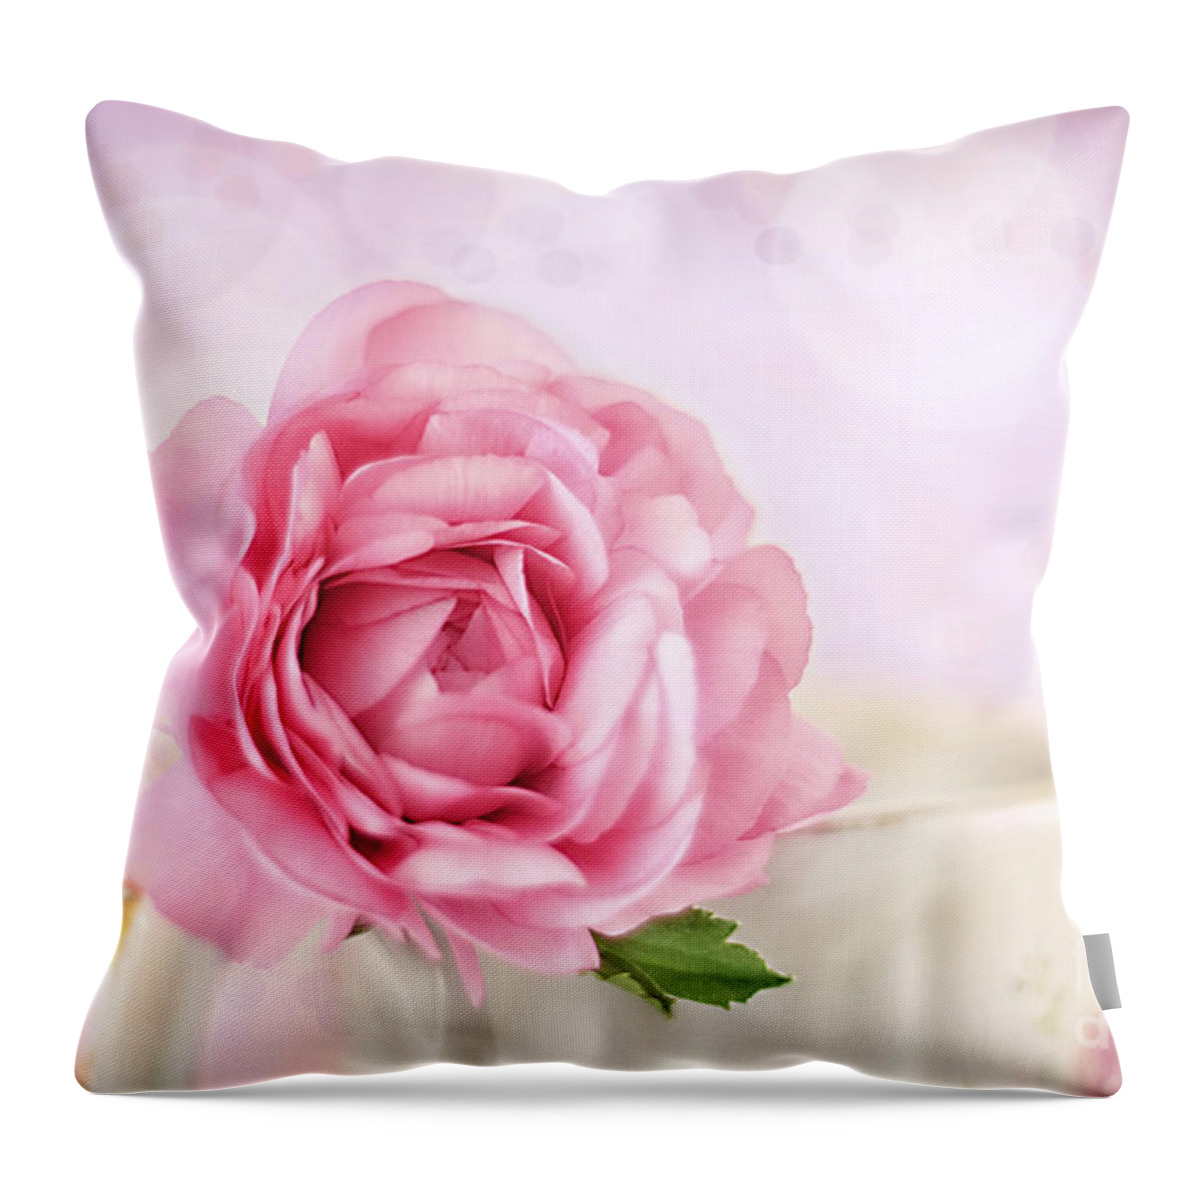 Aged Throw Pillow featuring the photograph Delicate II by Darren Fisher